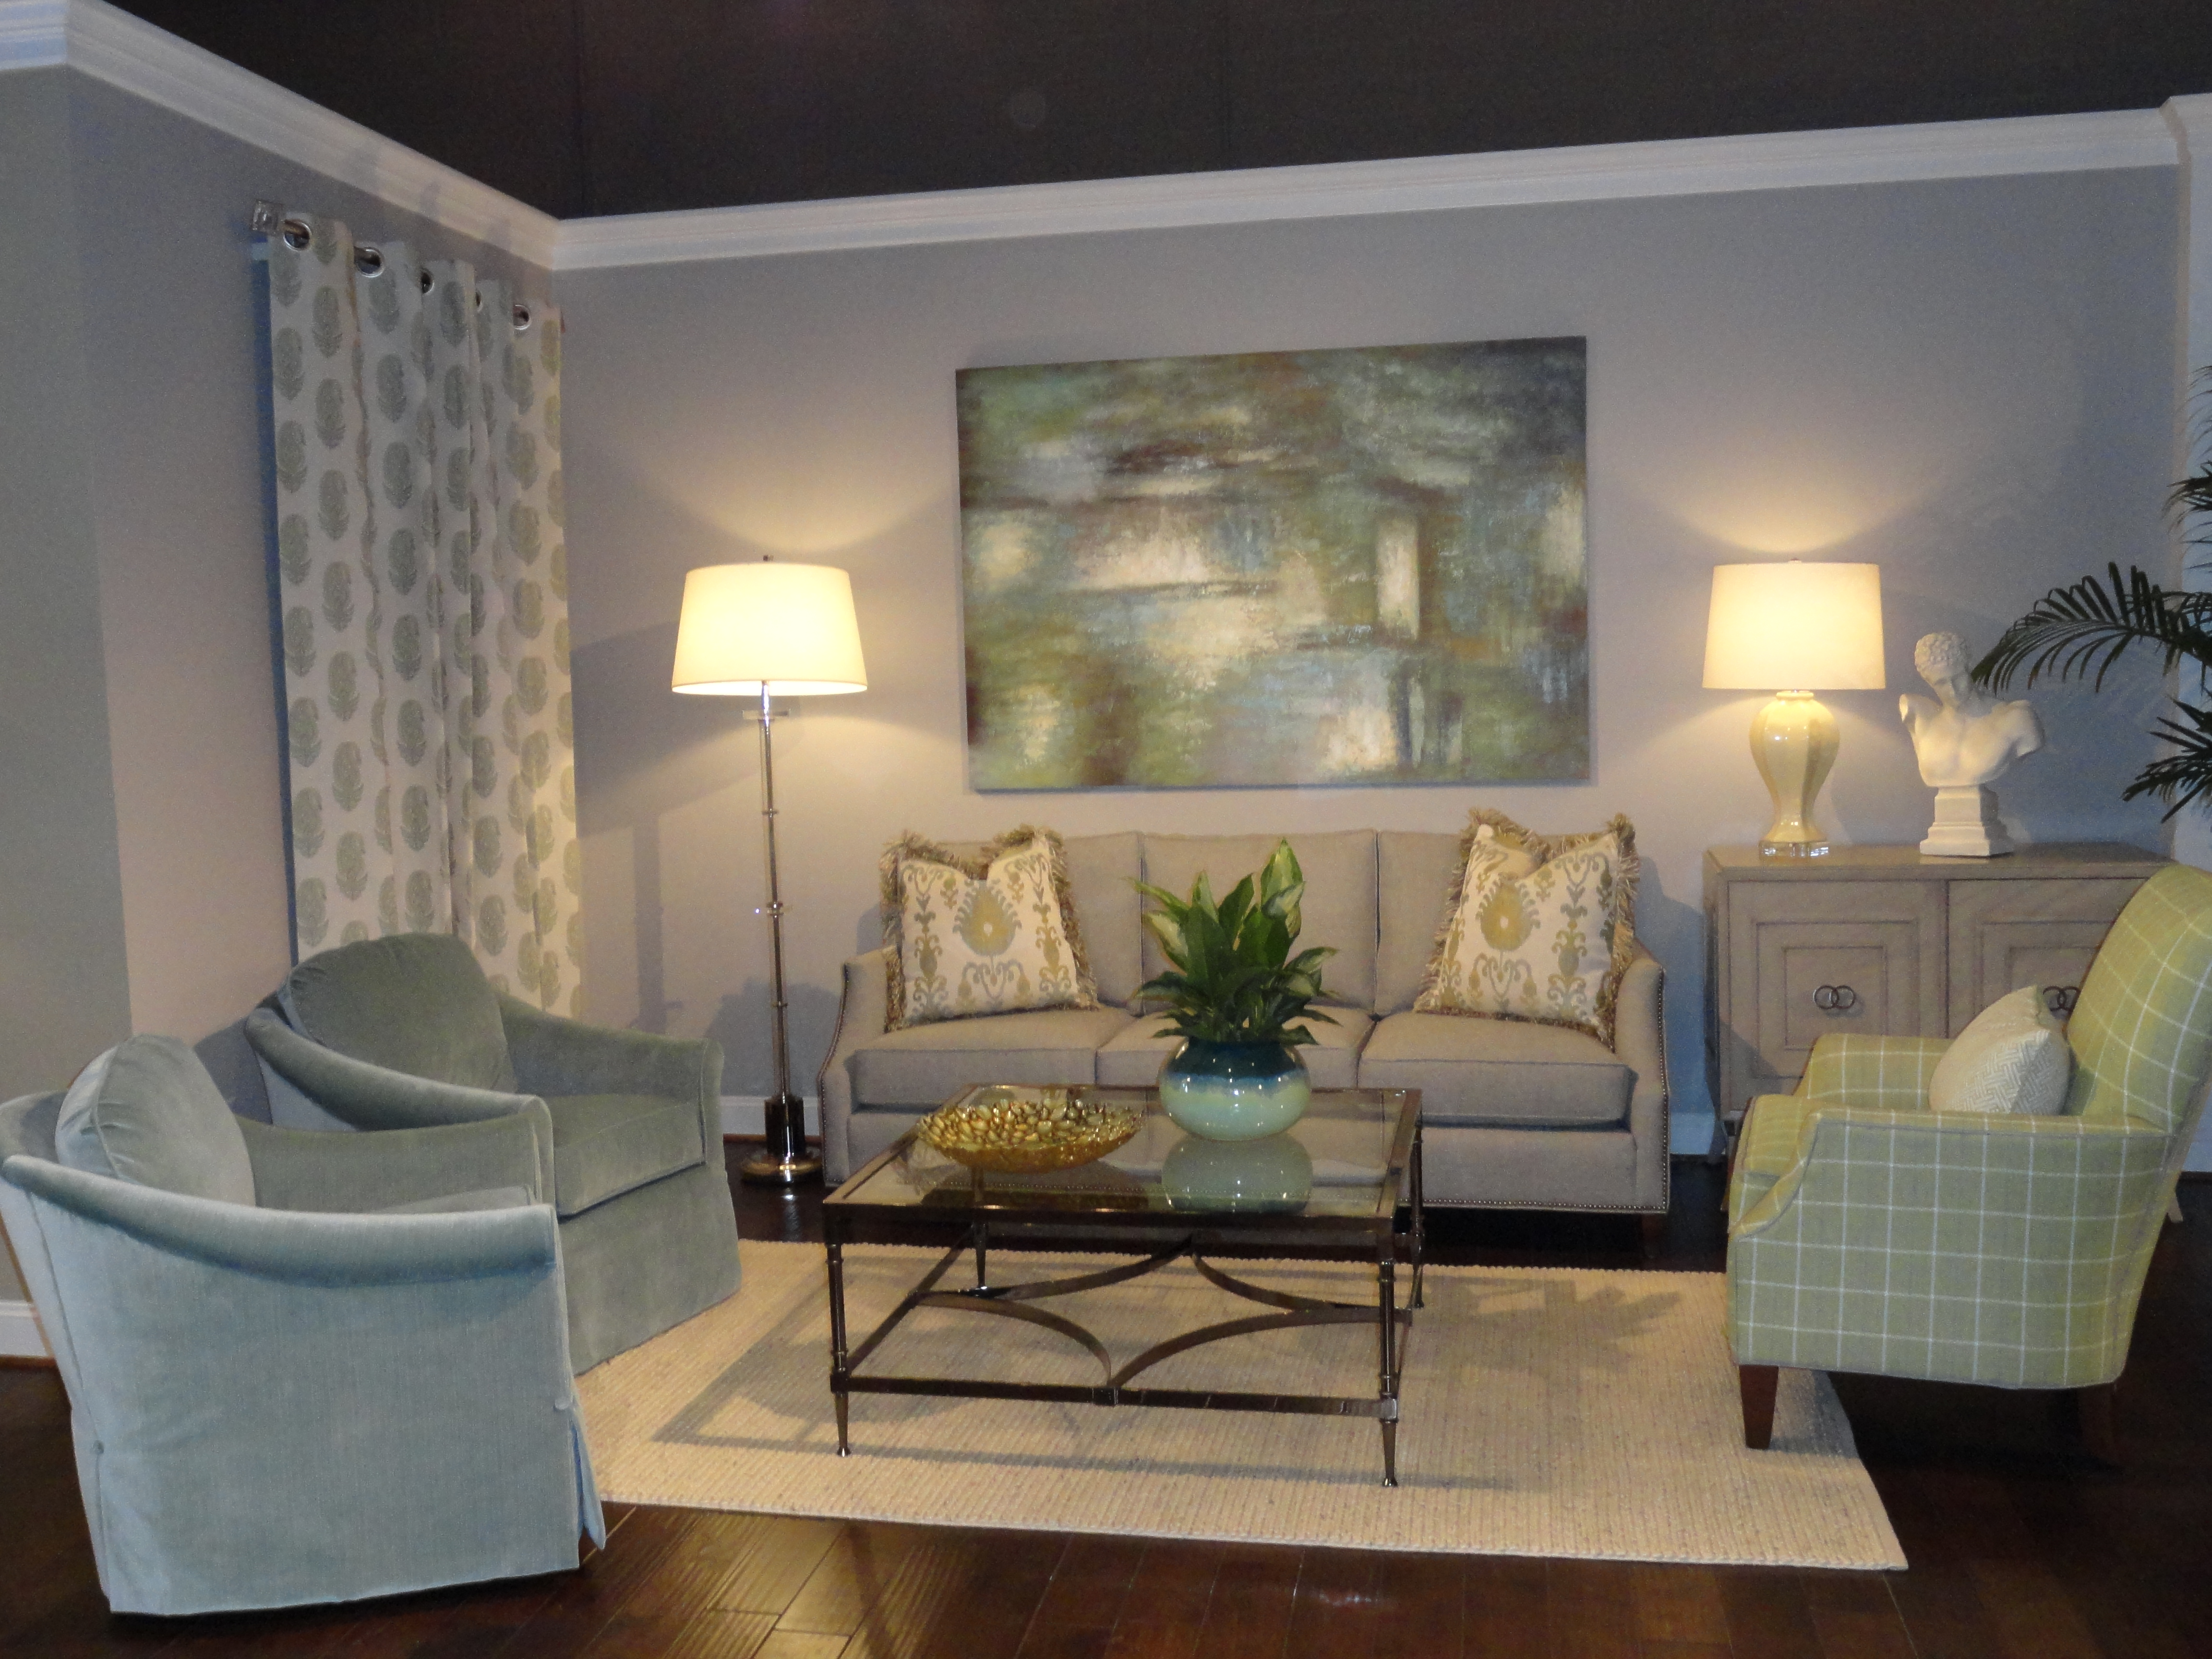 High Point Market Trends 2014: Blue and Gray